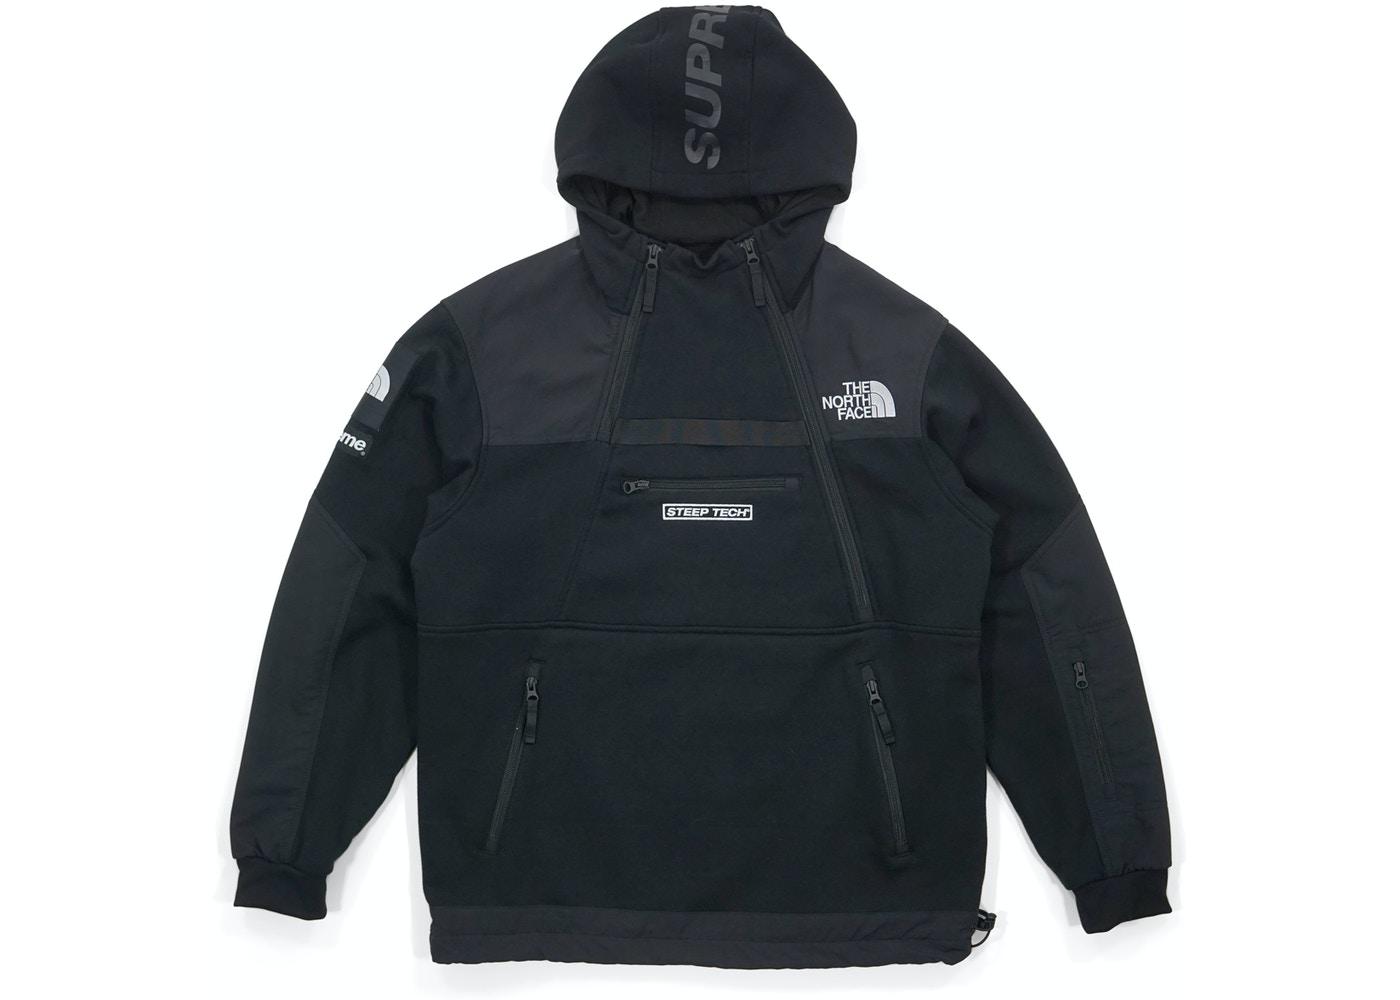 The North Face Steep Tech Hooded Sweatshirt Black by SUPREME 